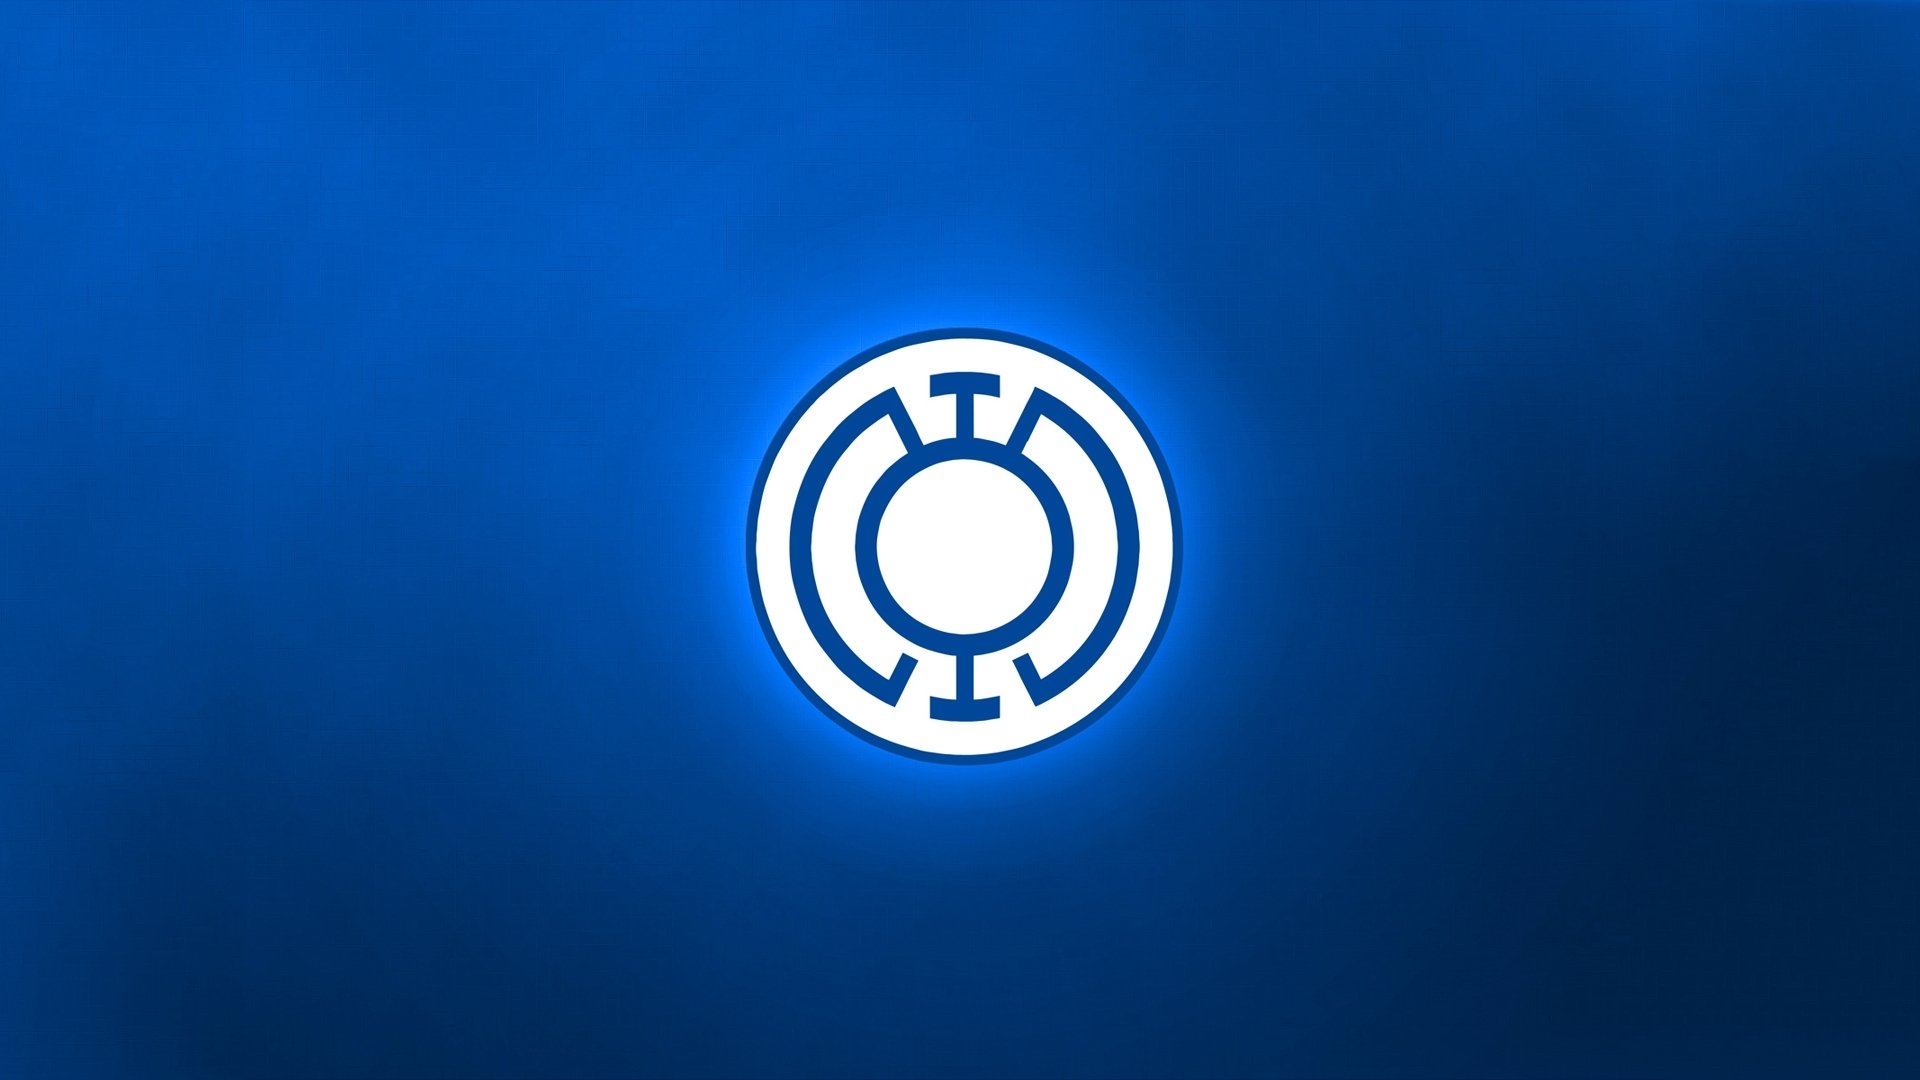 HQ Blue Lantern Corps Wallpapers | File 93.17Kb